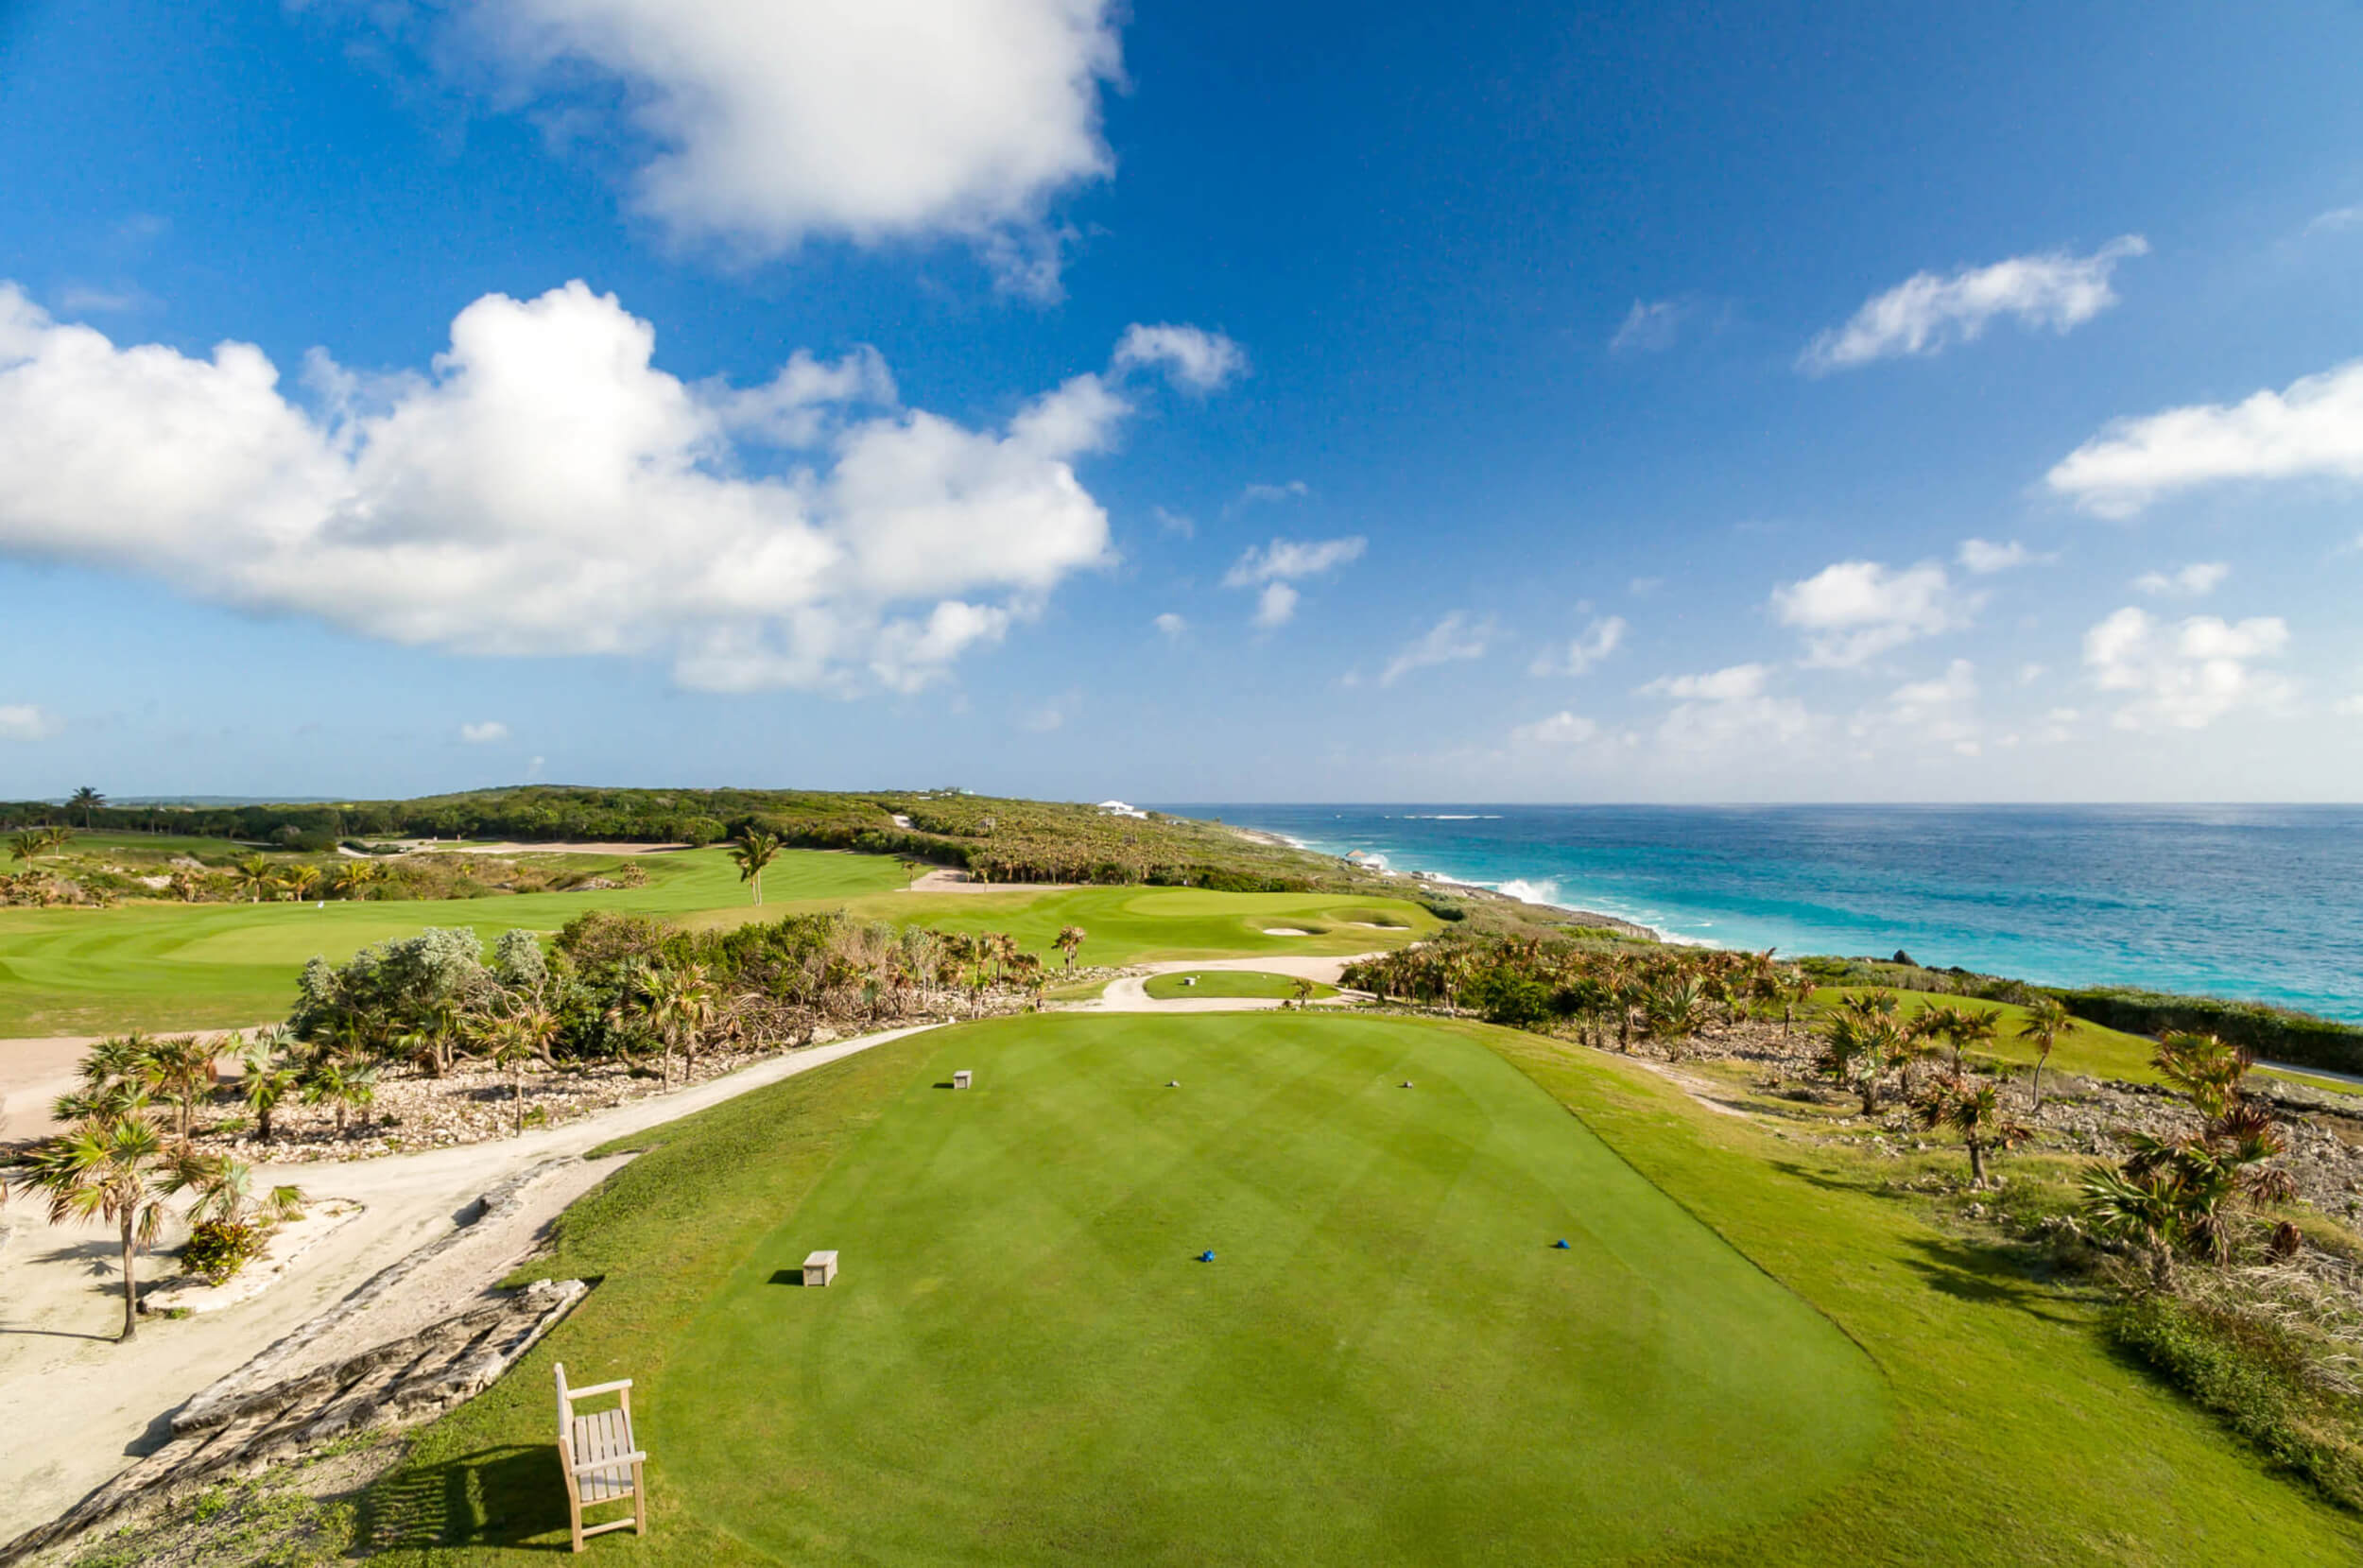 Close up view of The Abaco Club Golf Course